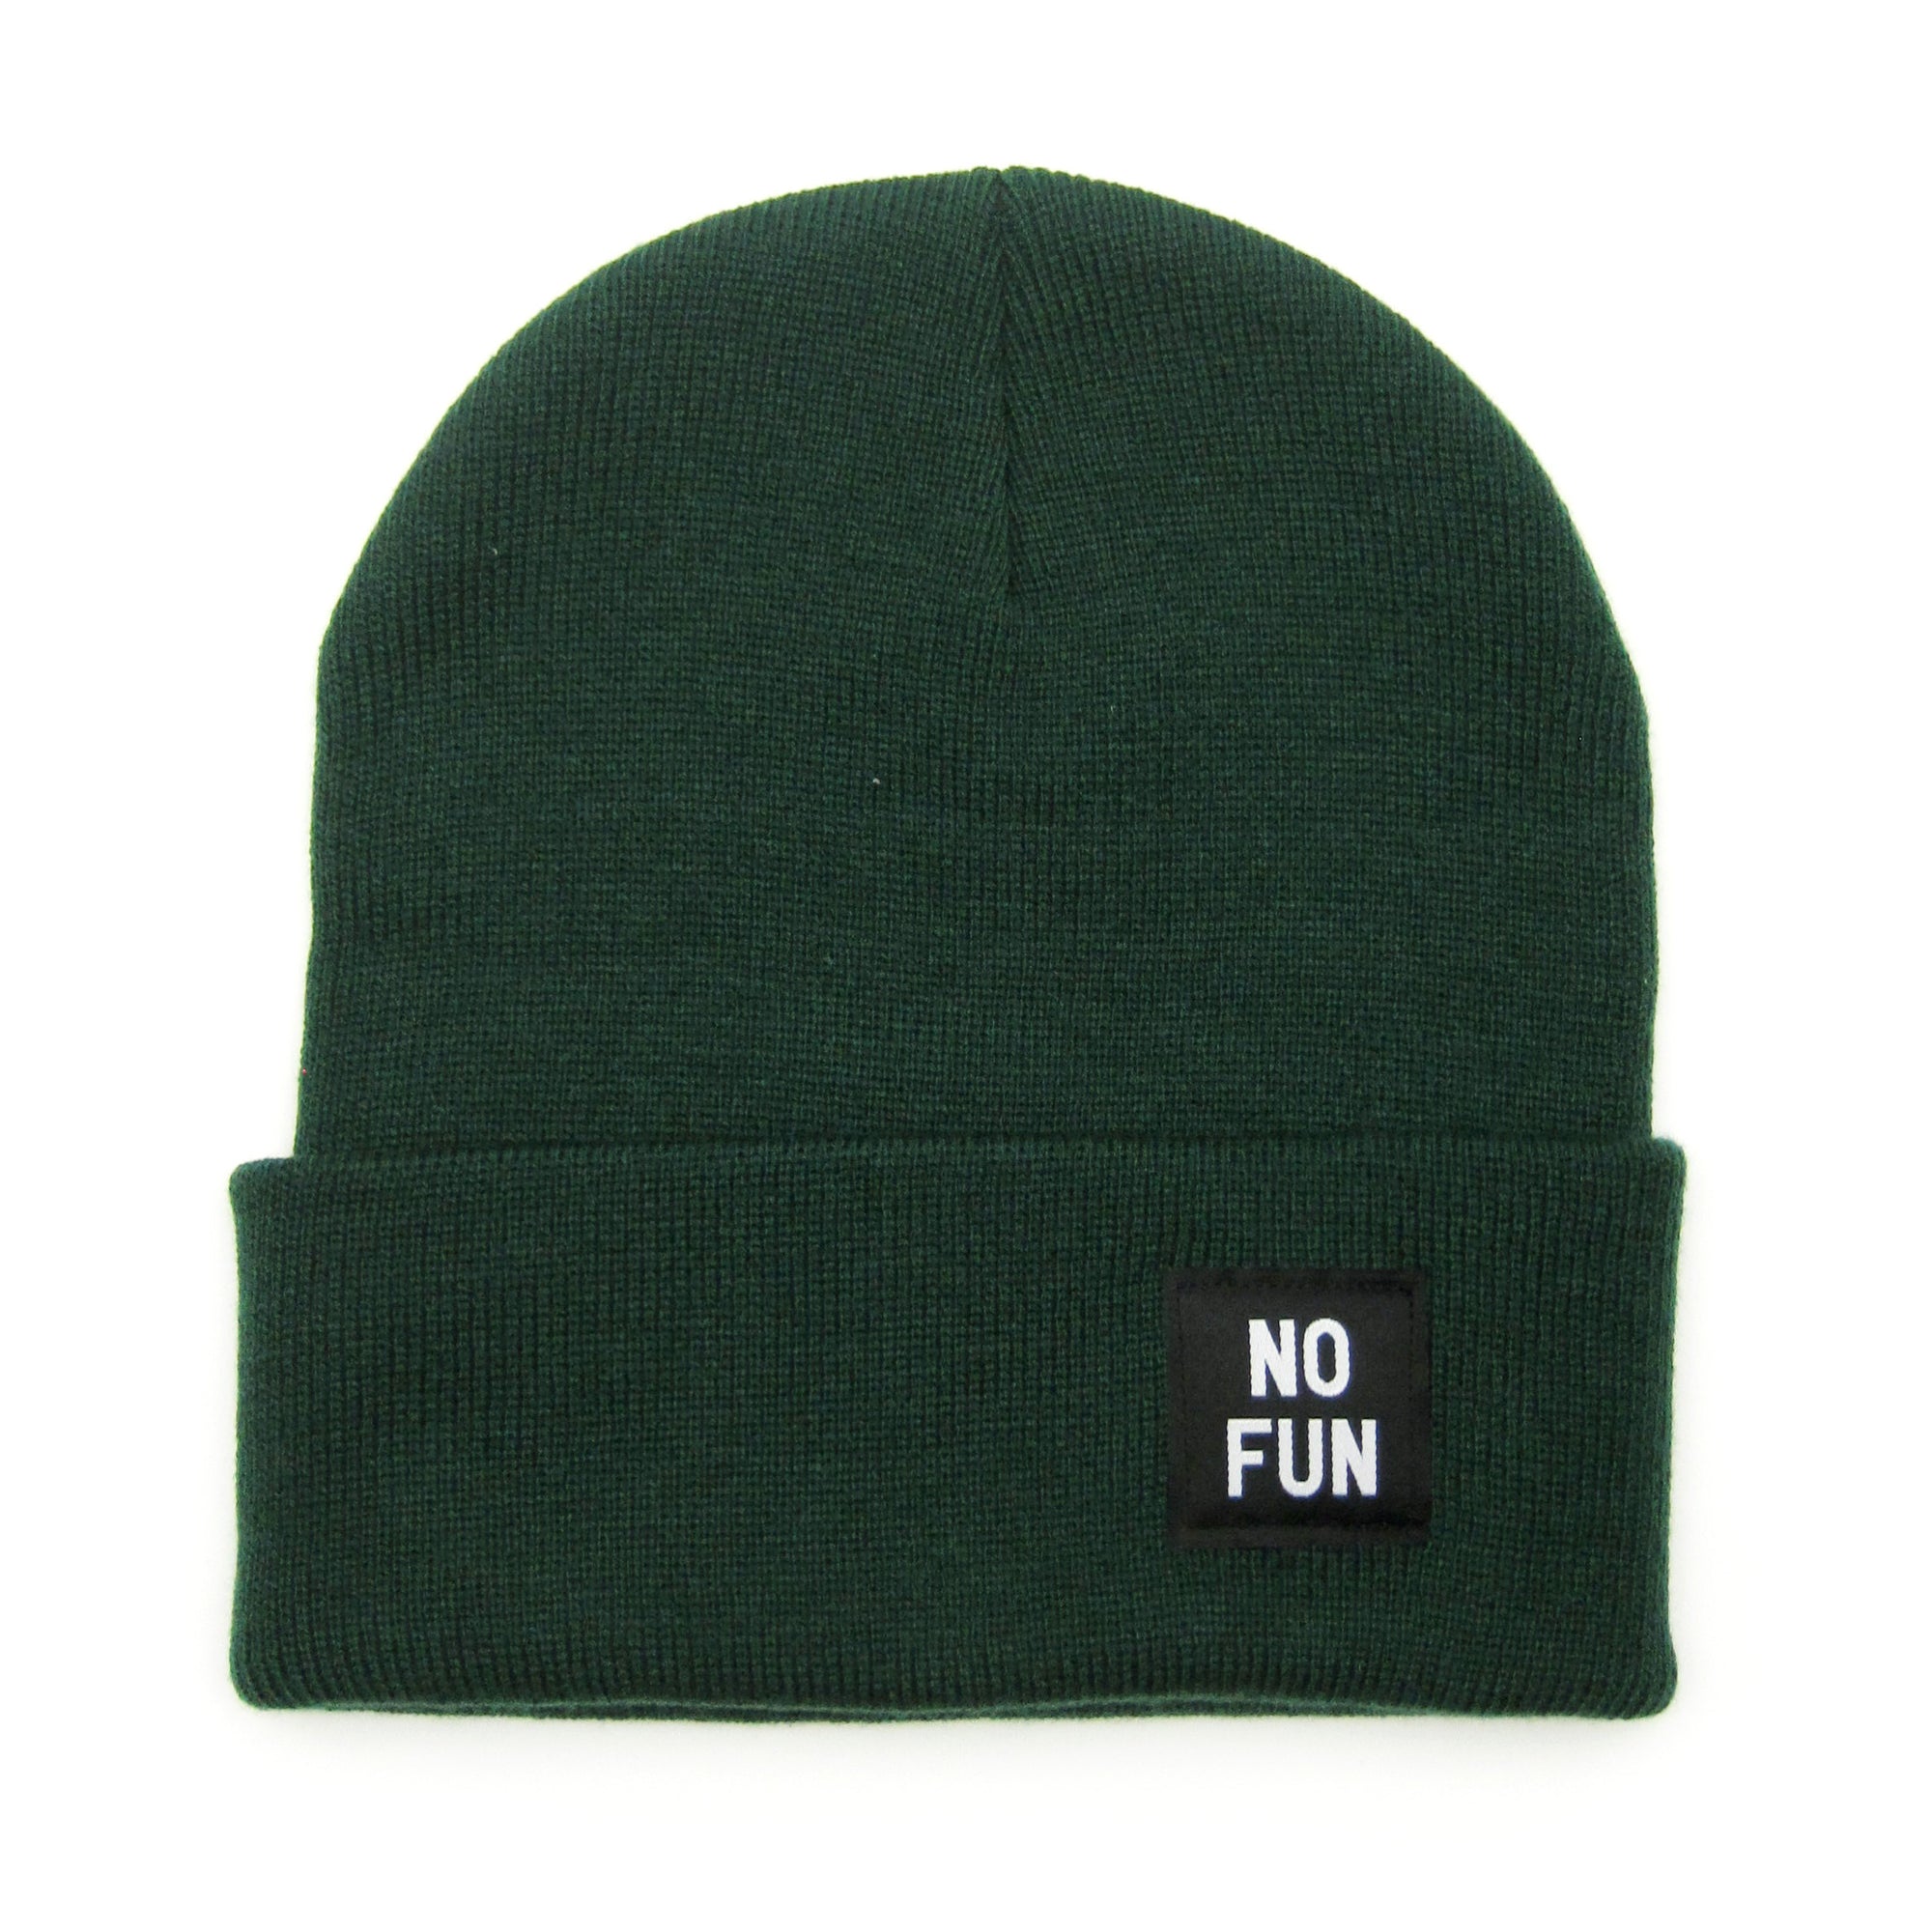 The classic "No Fun" labelled beanie in Forest Green. There is a small, black, woven label that reads "No Fun®" on the cuff.